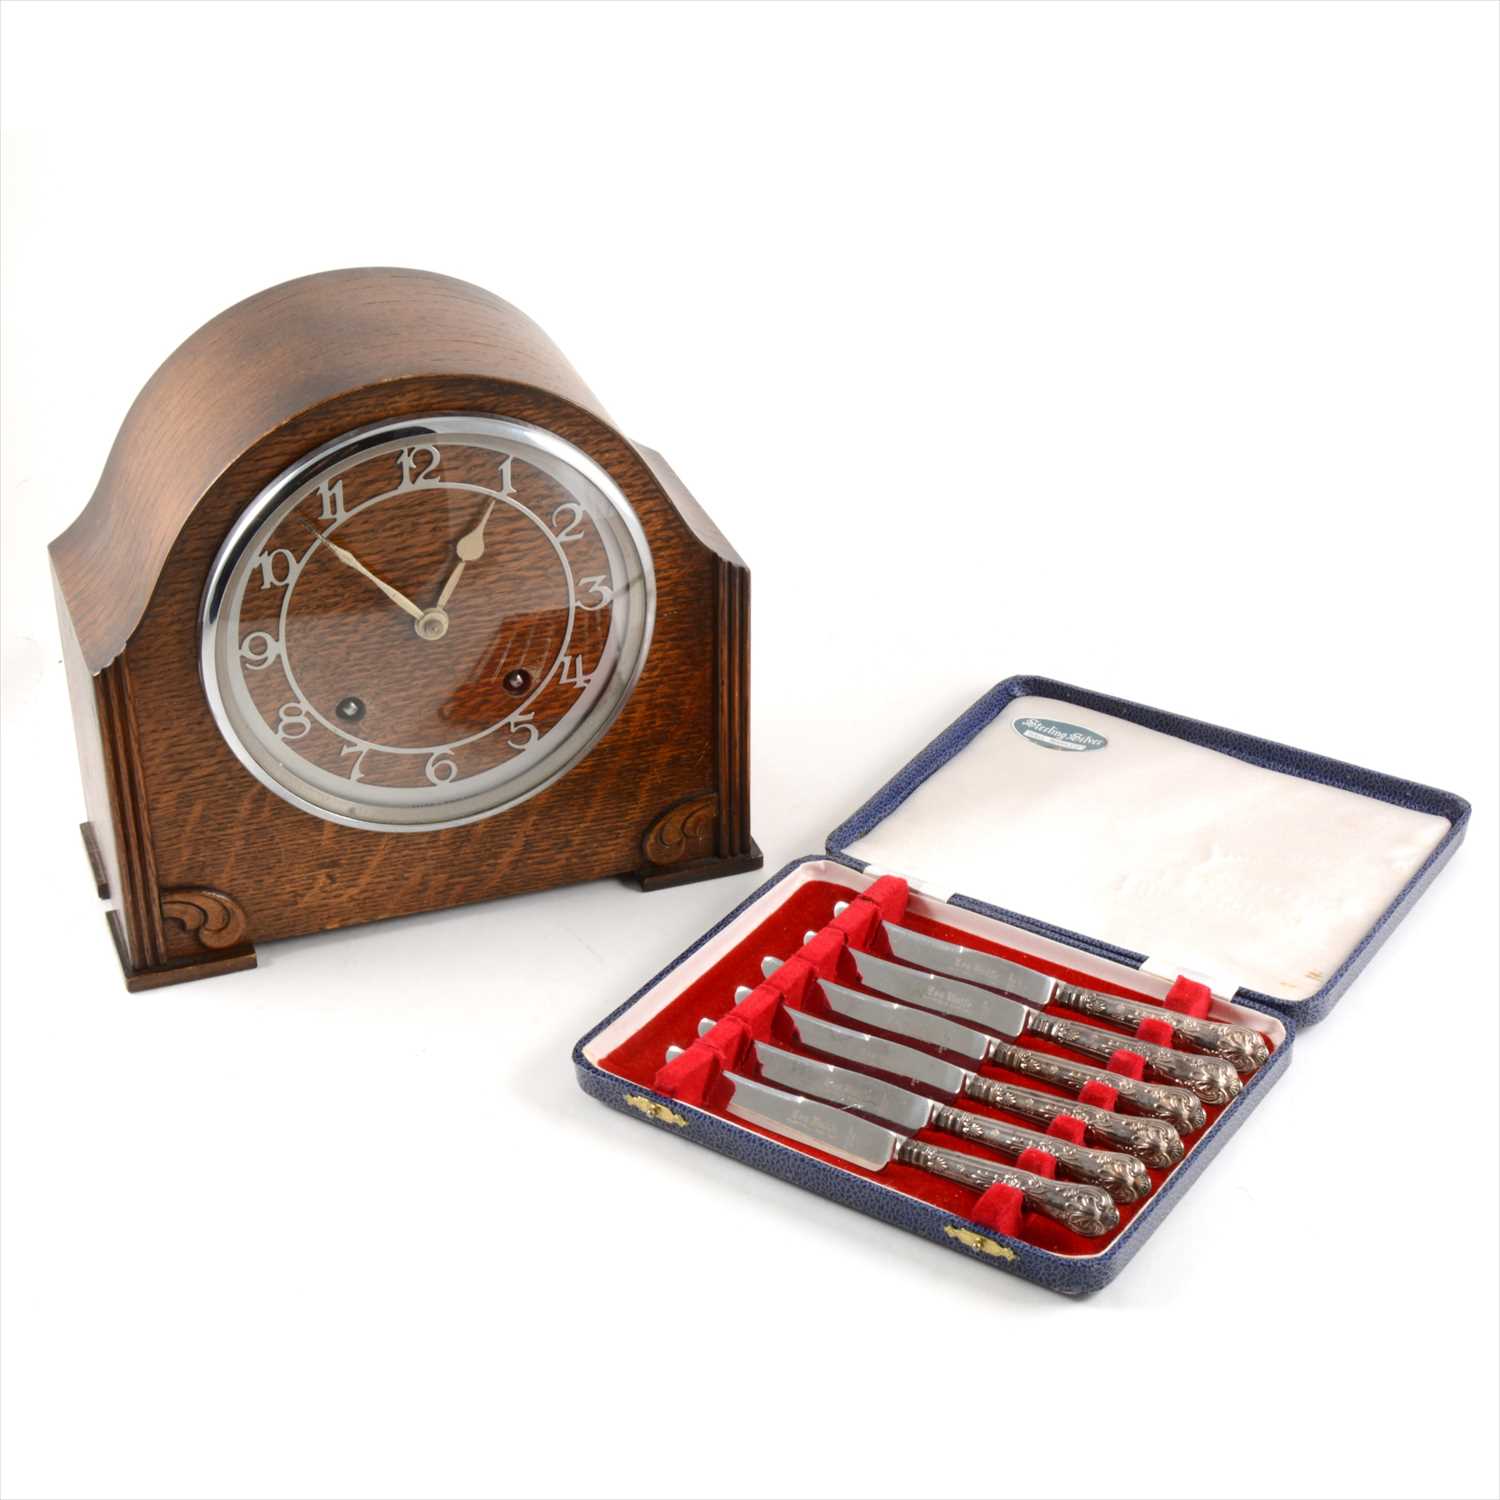 Lot 67 - An oak cased twin train mantel clock and cased set of tea knives.